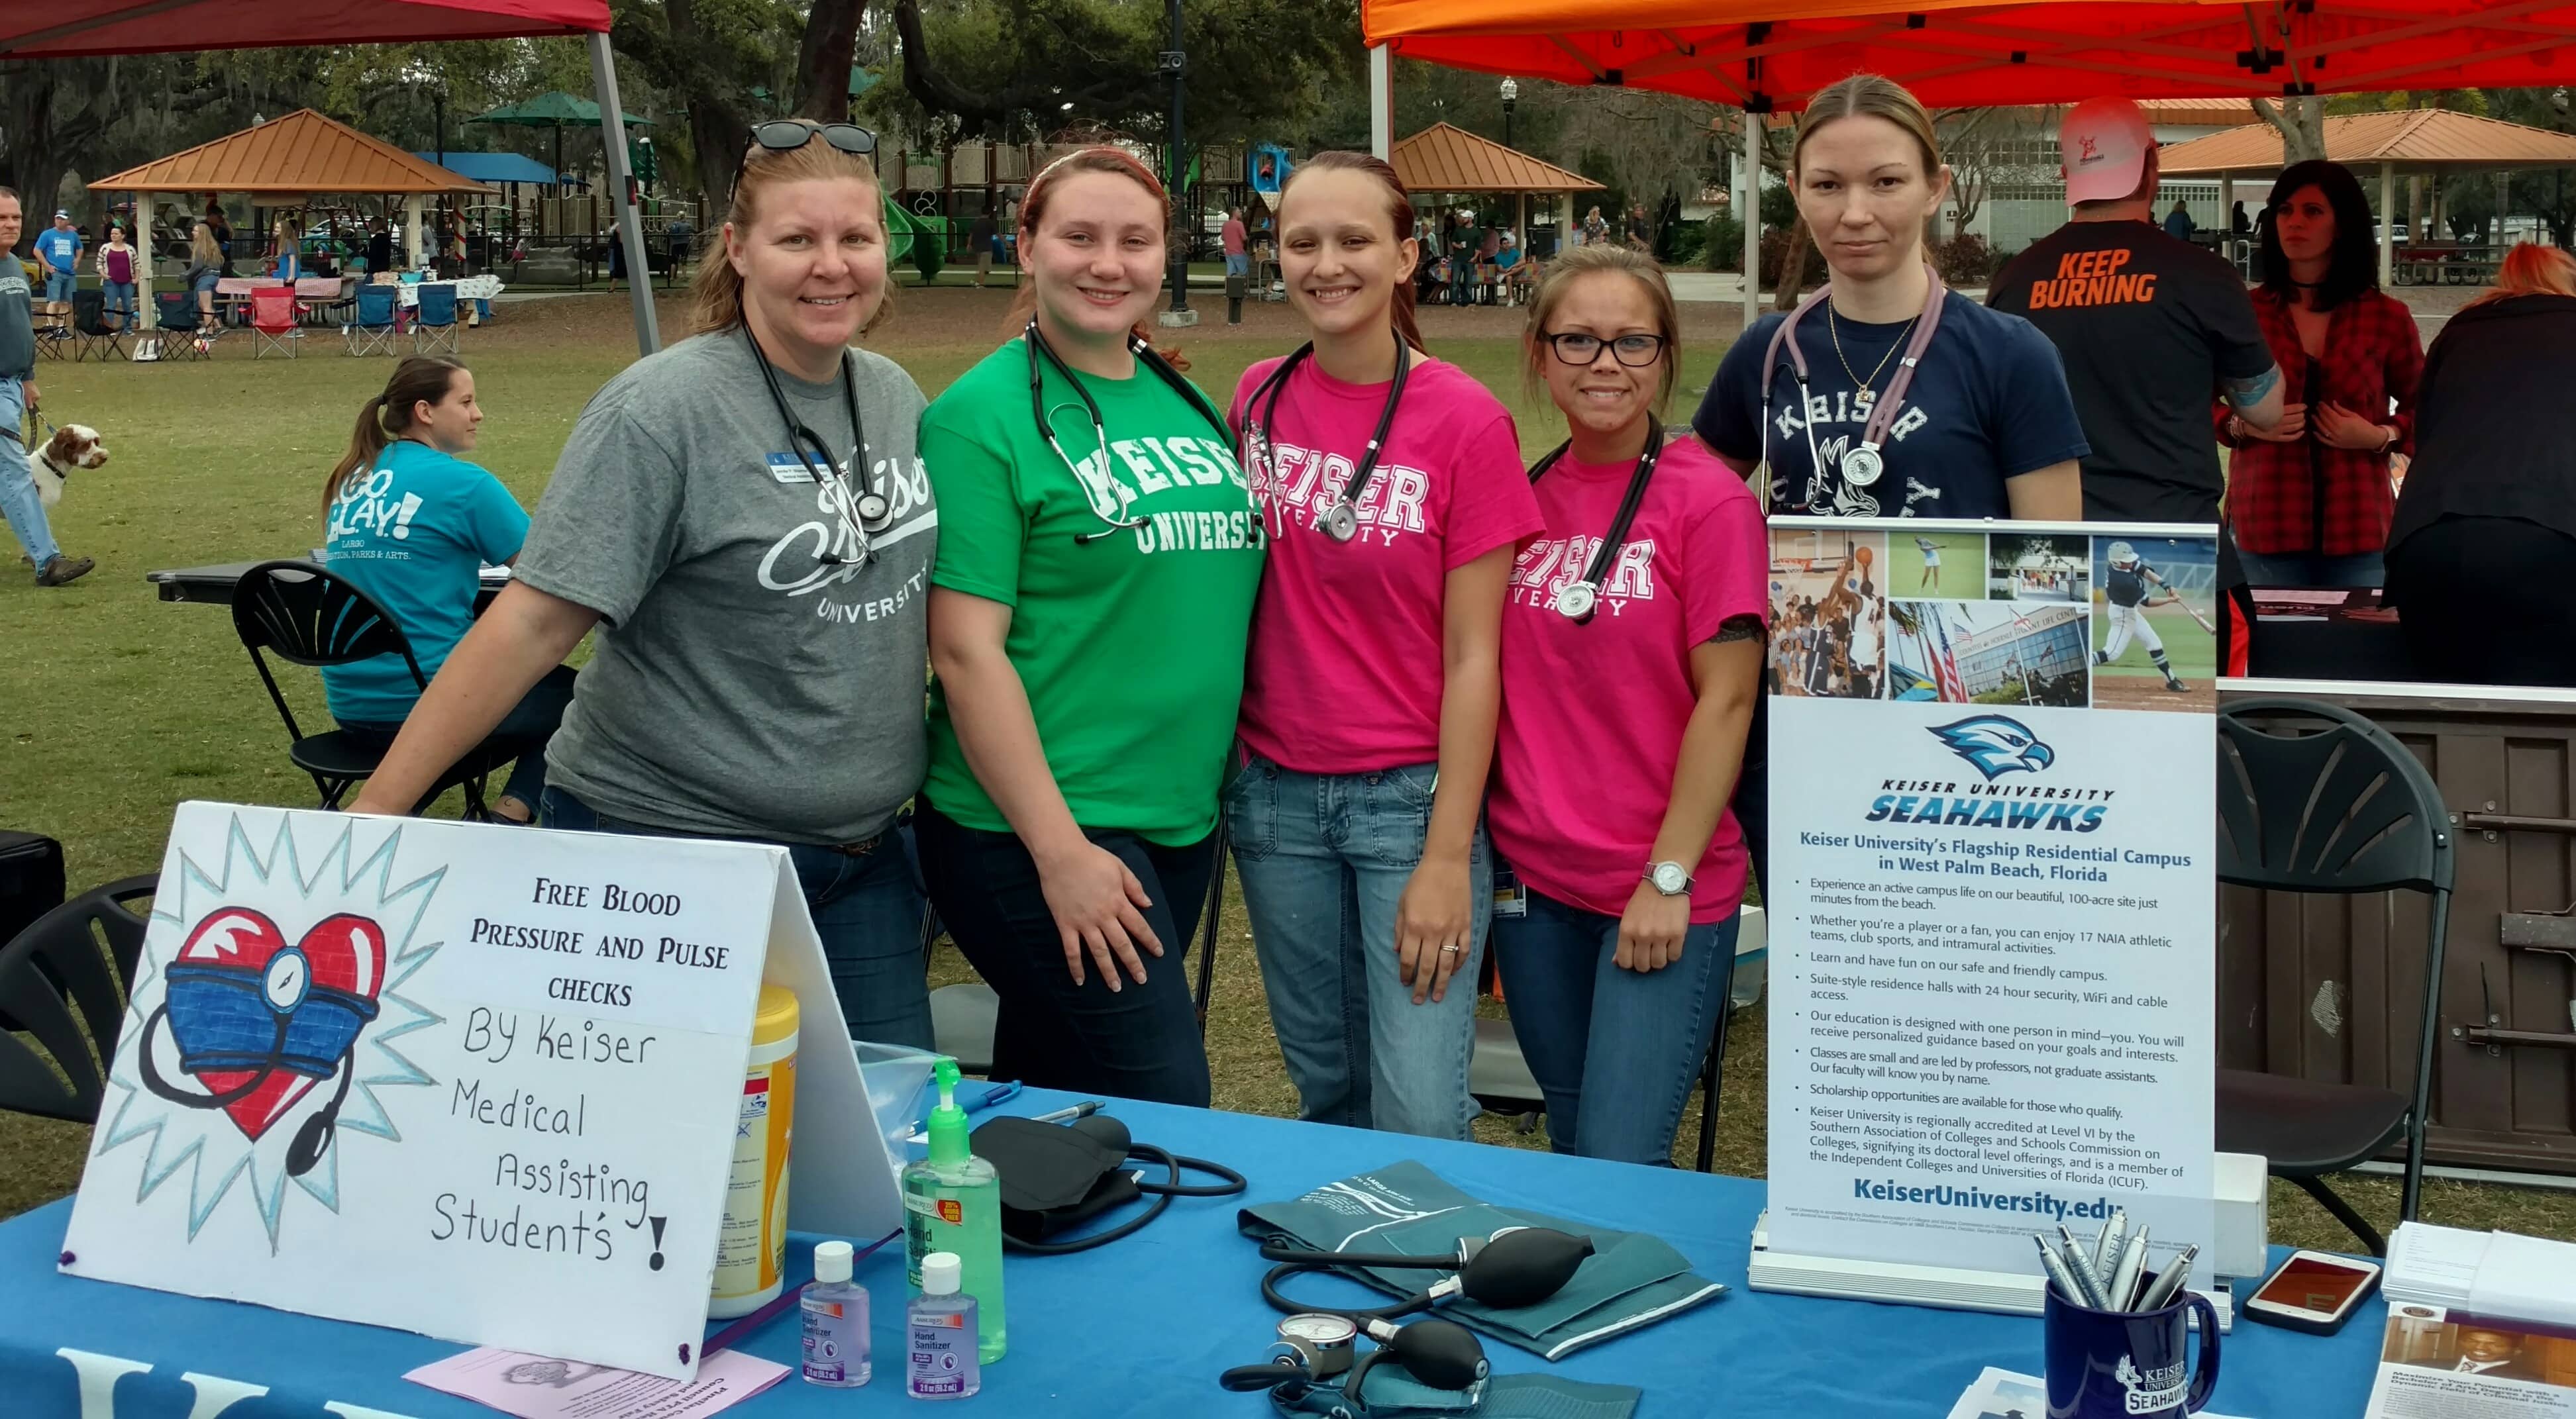 Medical Assisting Students Attend Health and Safety Association Fair